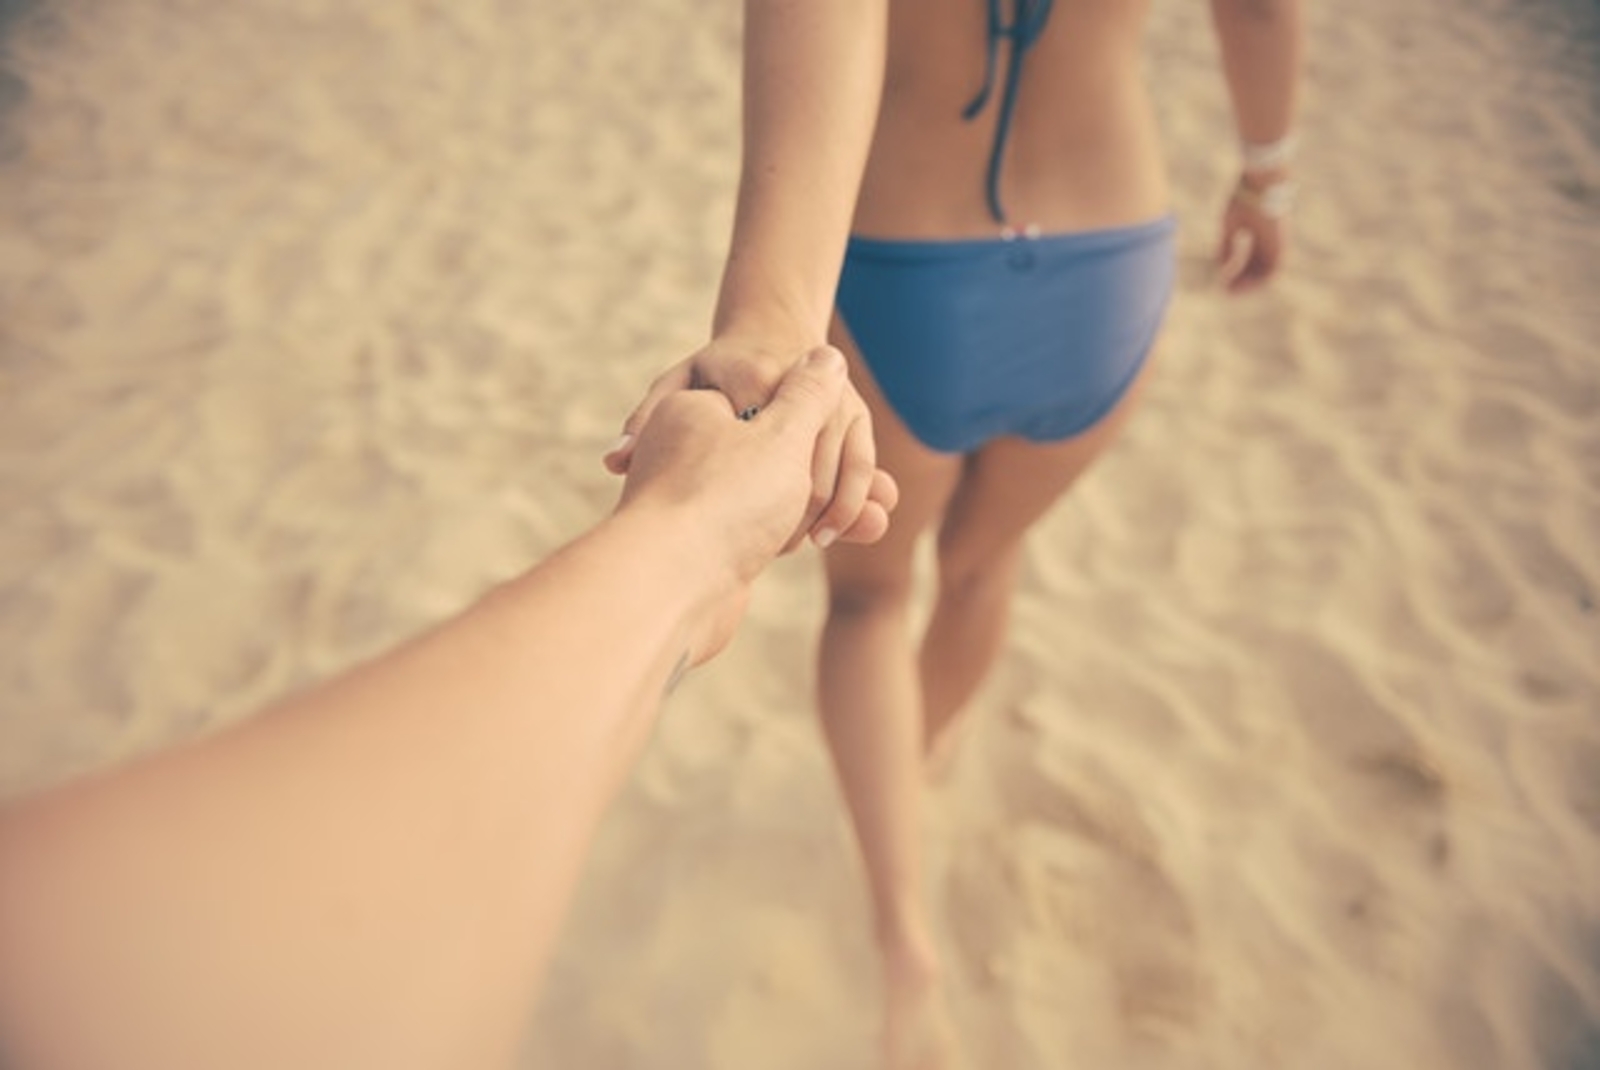 Arm being led down the beach by person in bikini